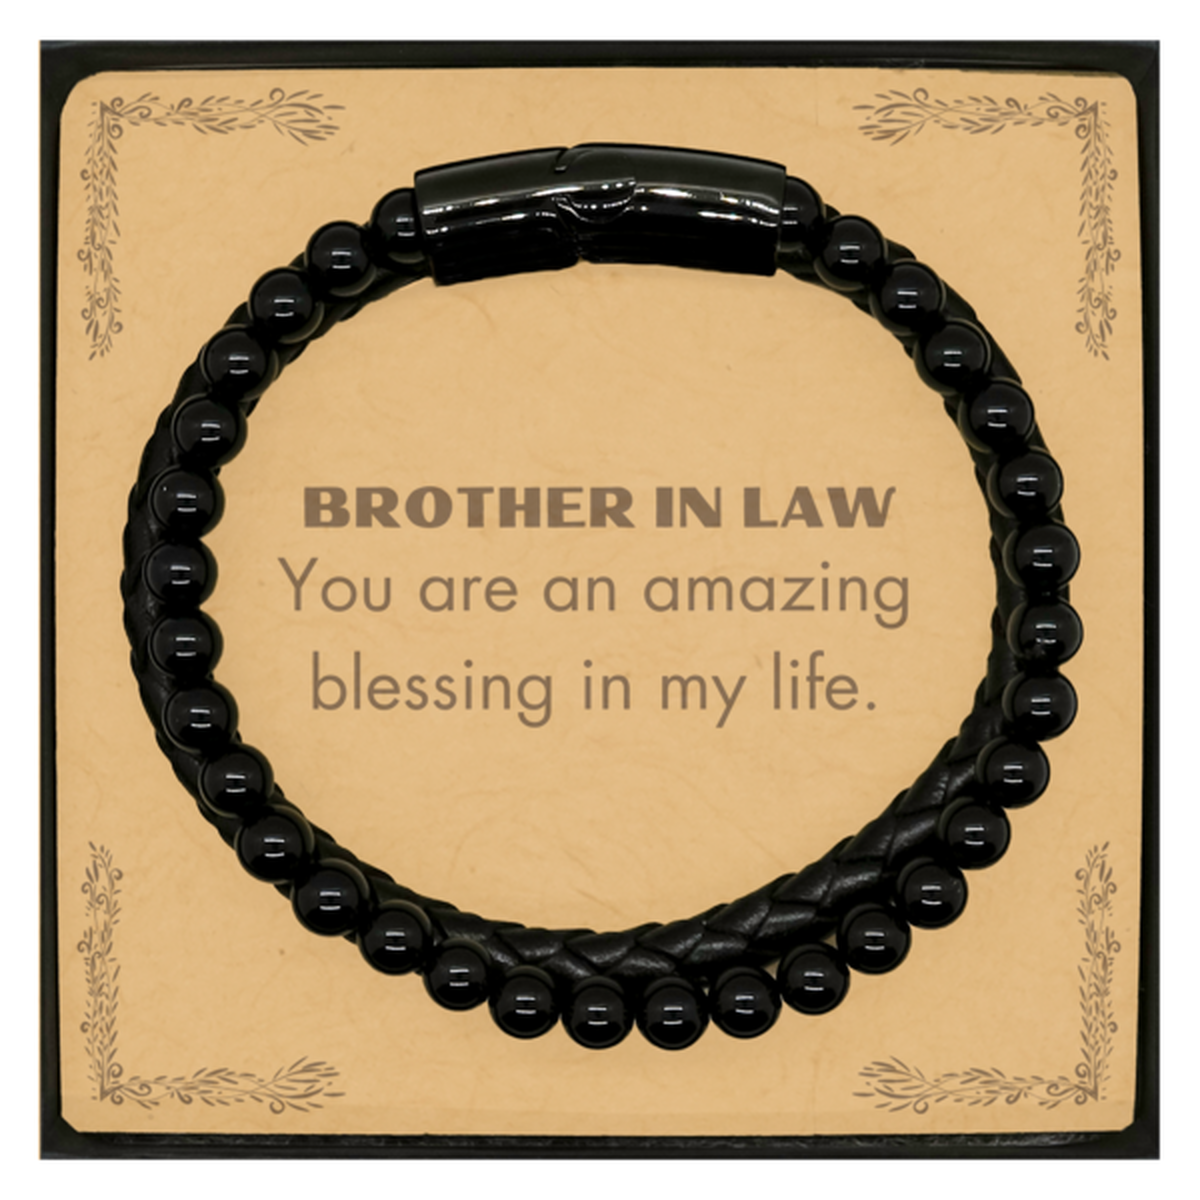 Brother In Law Stone Leather Bracelets, You are an amazing blessing in my life, Thank You Gifts For Brother In Law, Inspirational Birthday Christmas Unique Gifts For Brother In Law